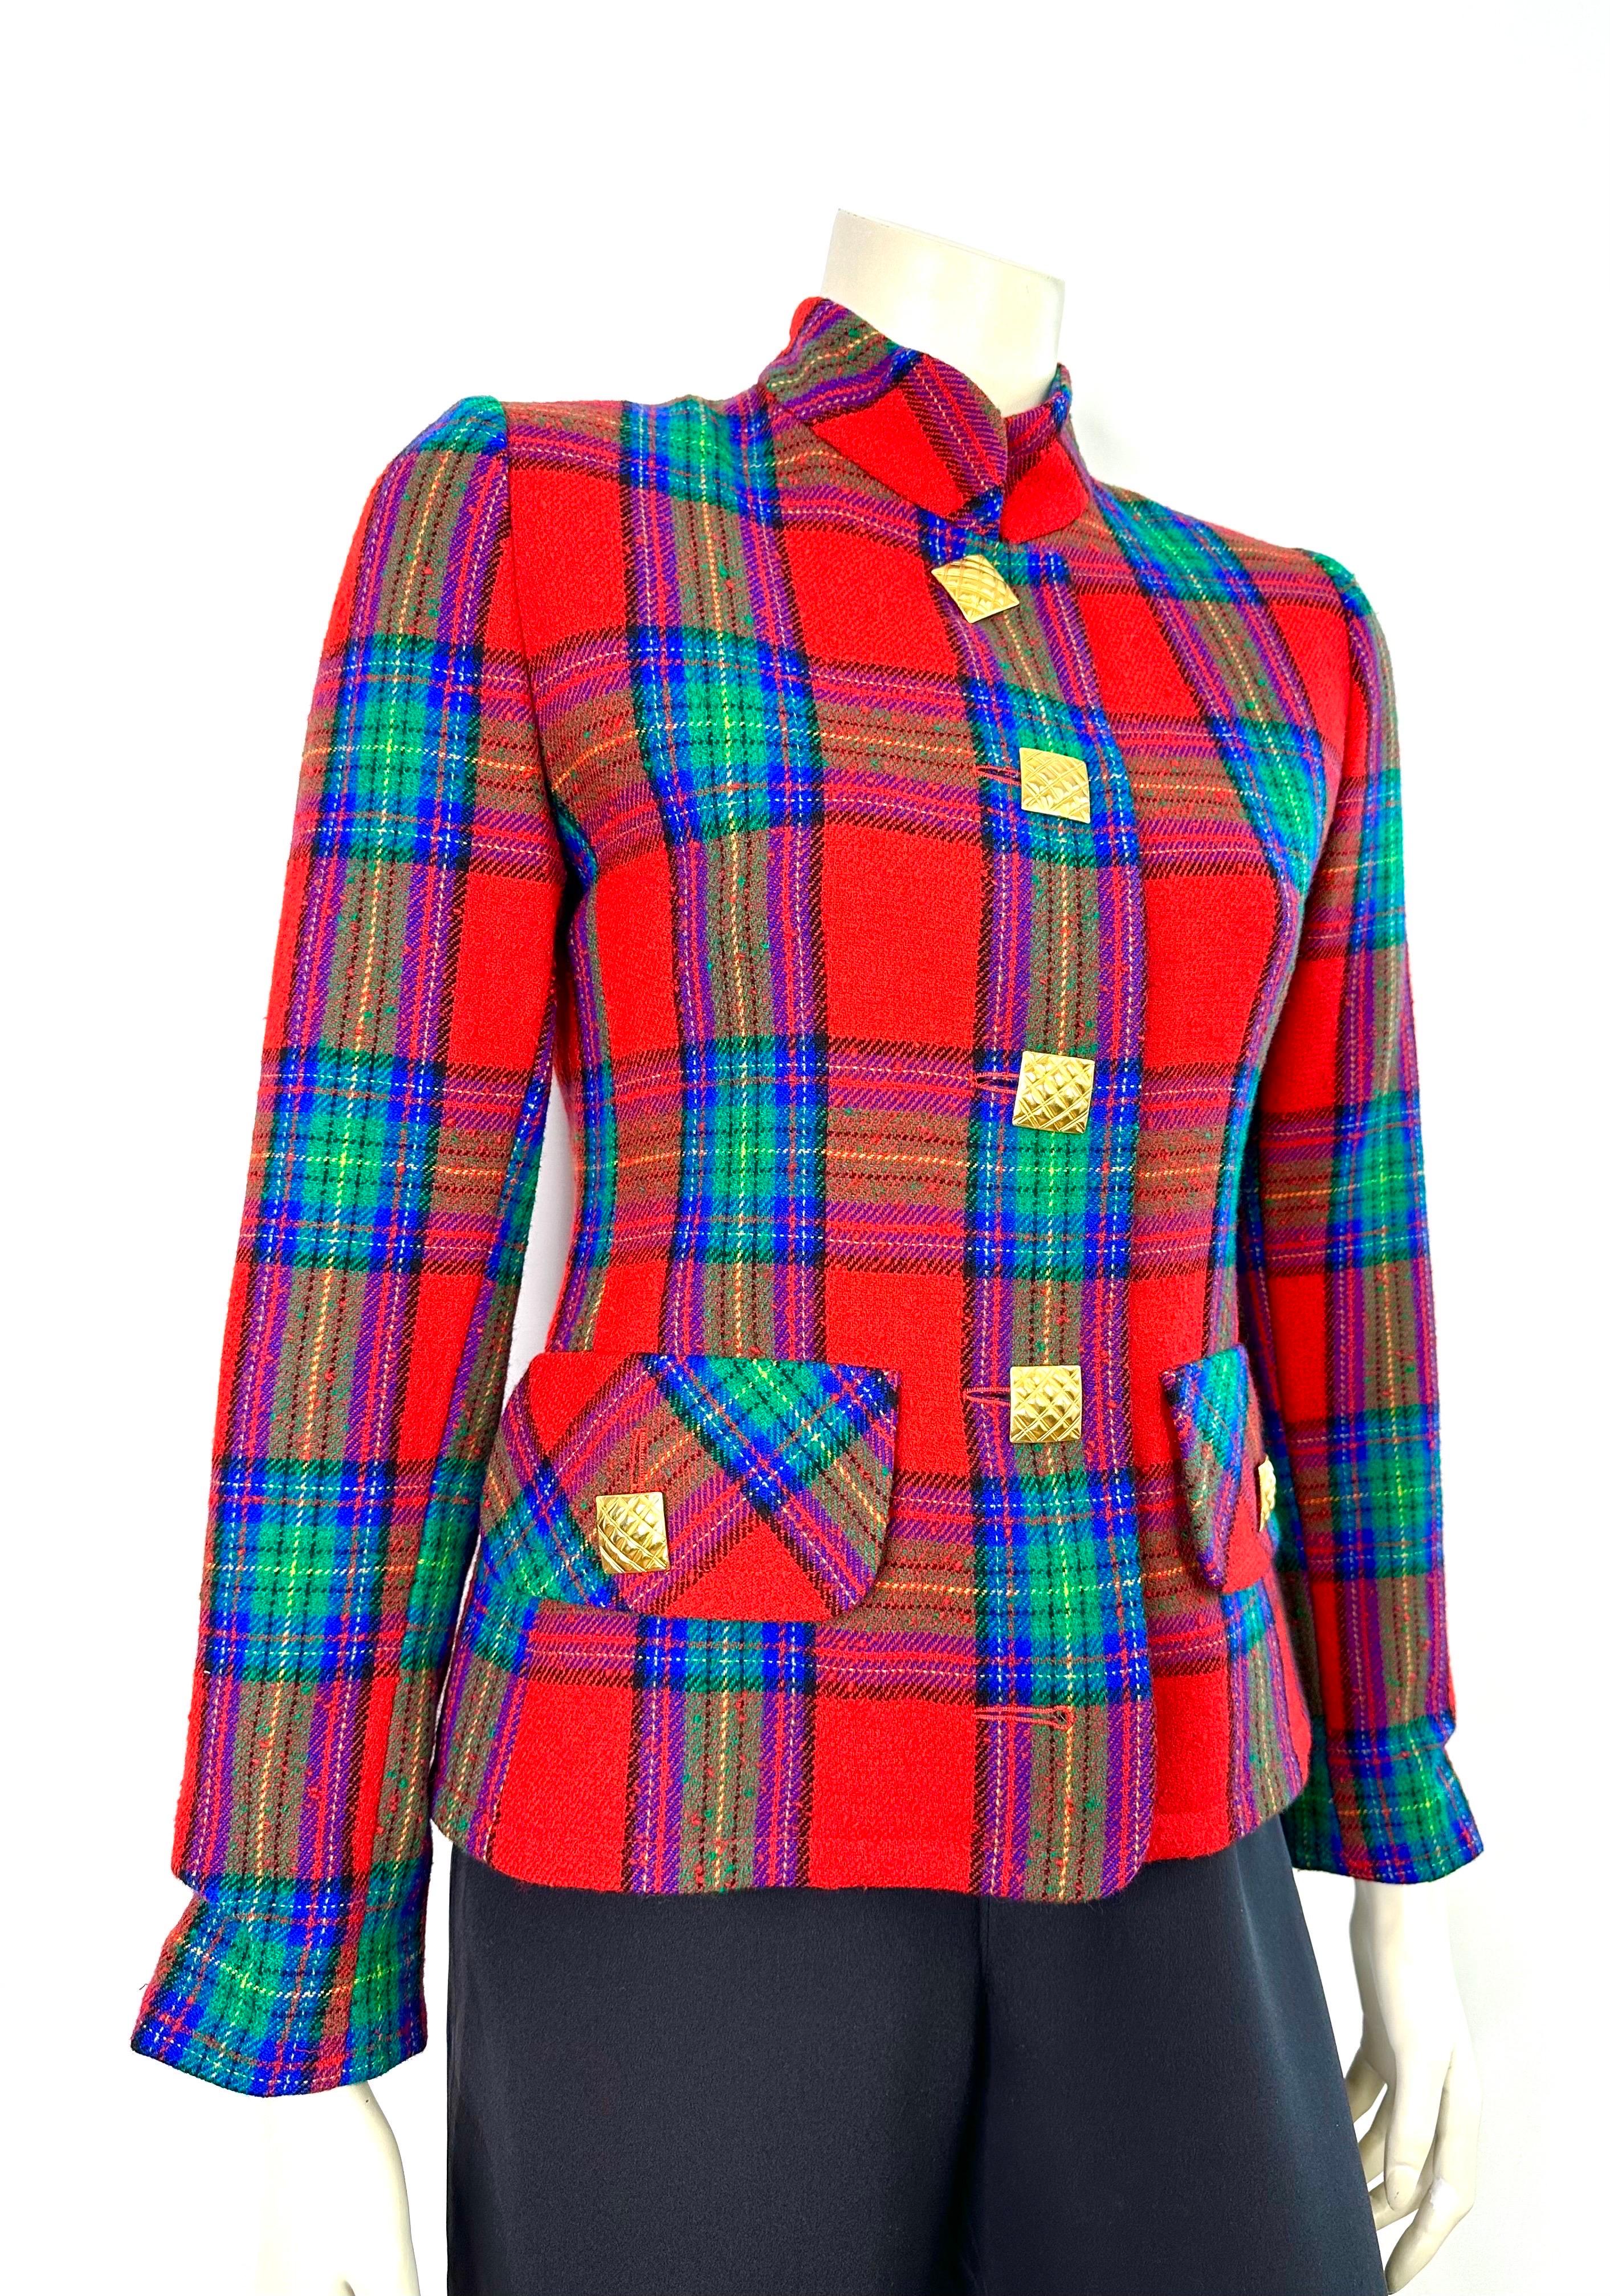 Givenchy fitted jacket in wool
Tartan pattern
High collar
Magnificent square quilted buttons in gold metal
Sewn-in flap pockets
Size 36
Shoulder width 36cm
Chest width 46cm
Length 60cm
Sleeve length 61cm
Made in France
In very good vintage condition